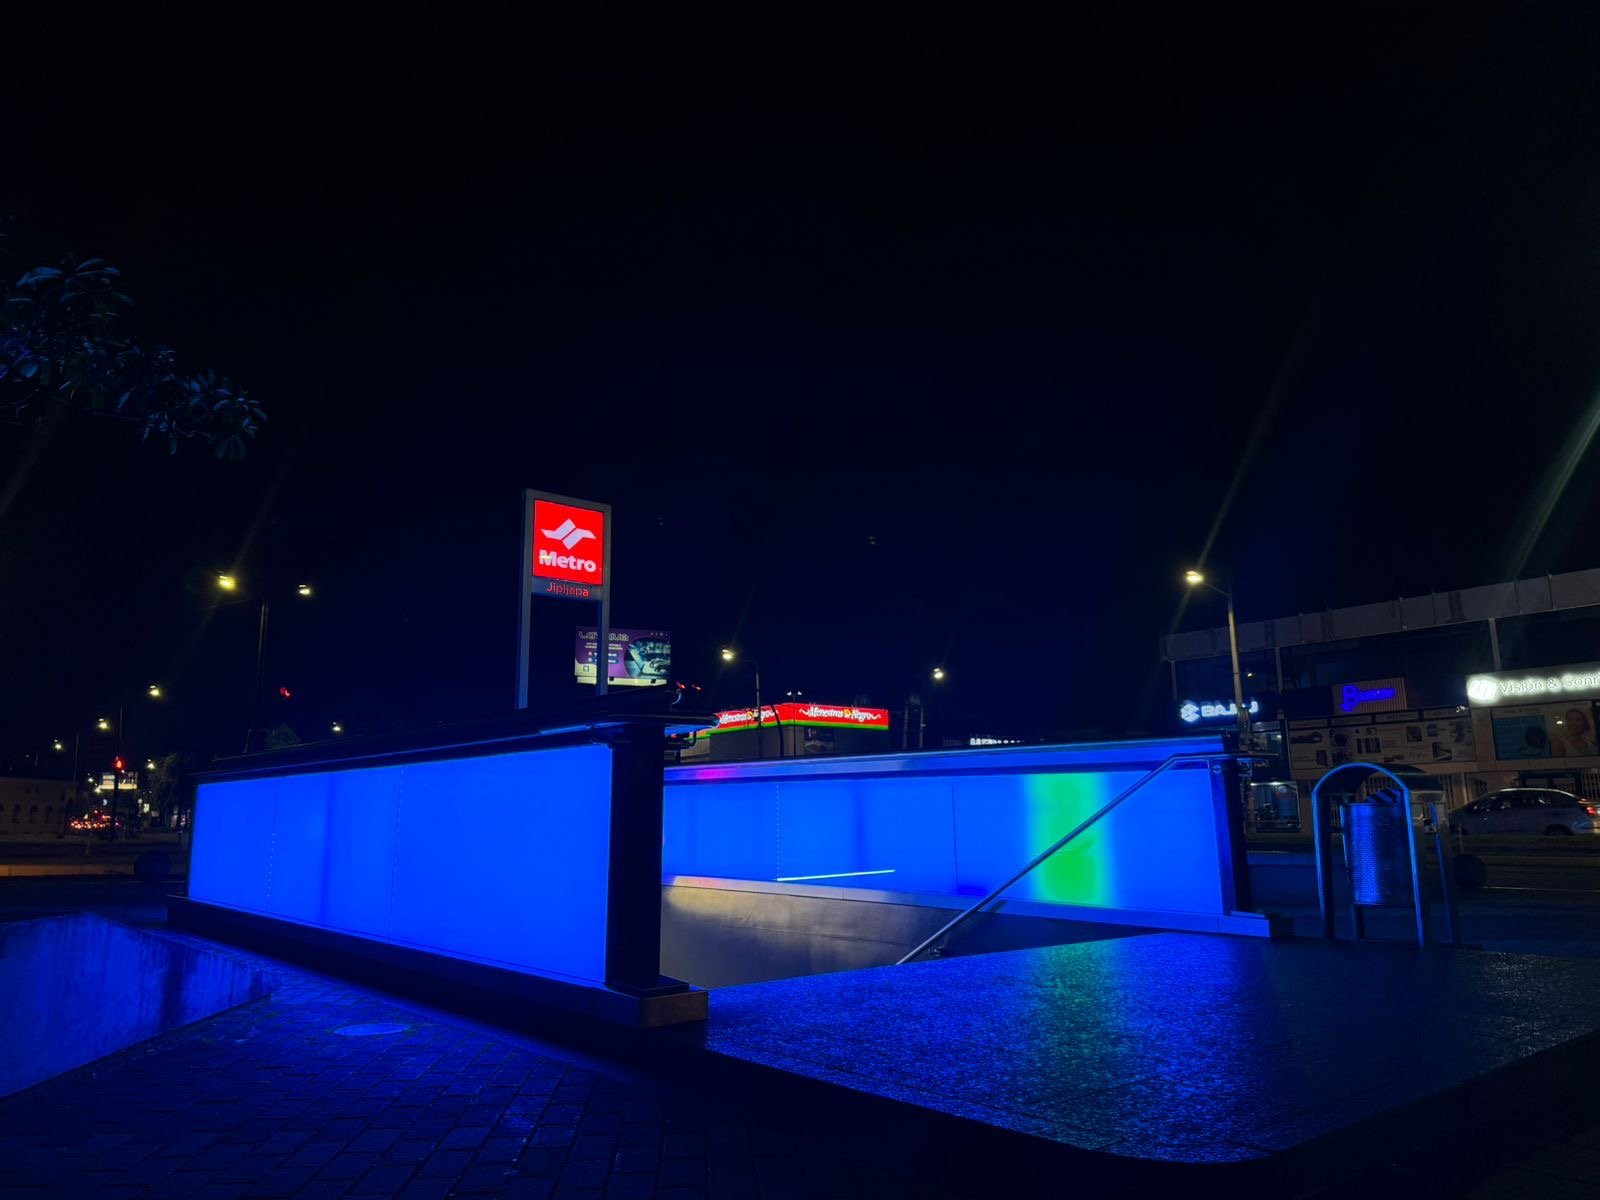 A metro entrance lit up in blue